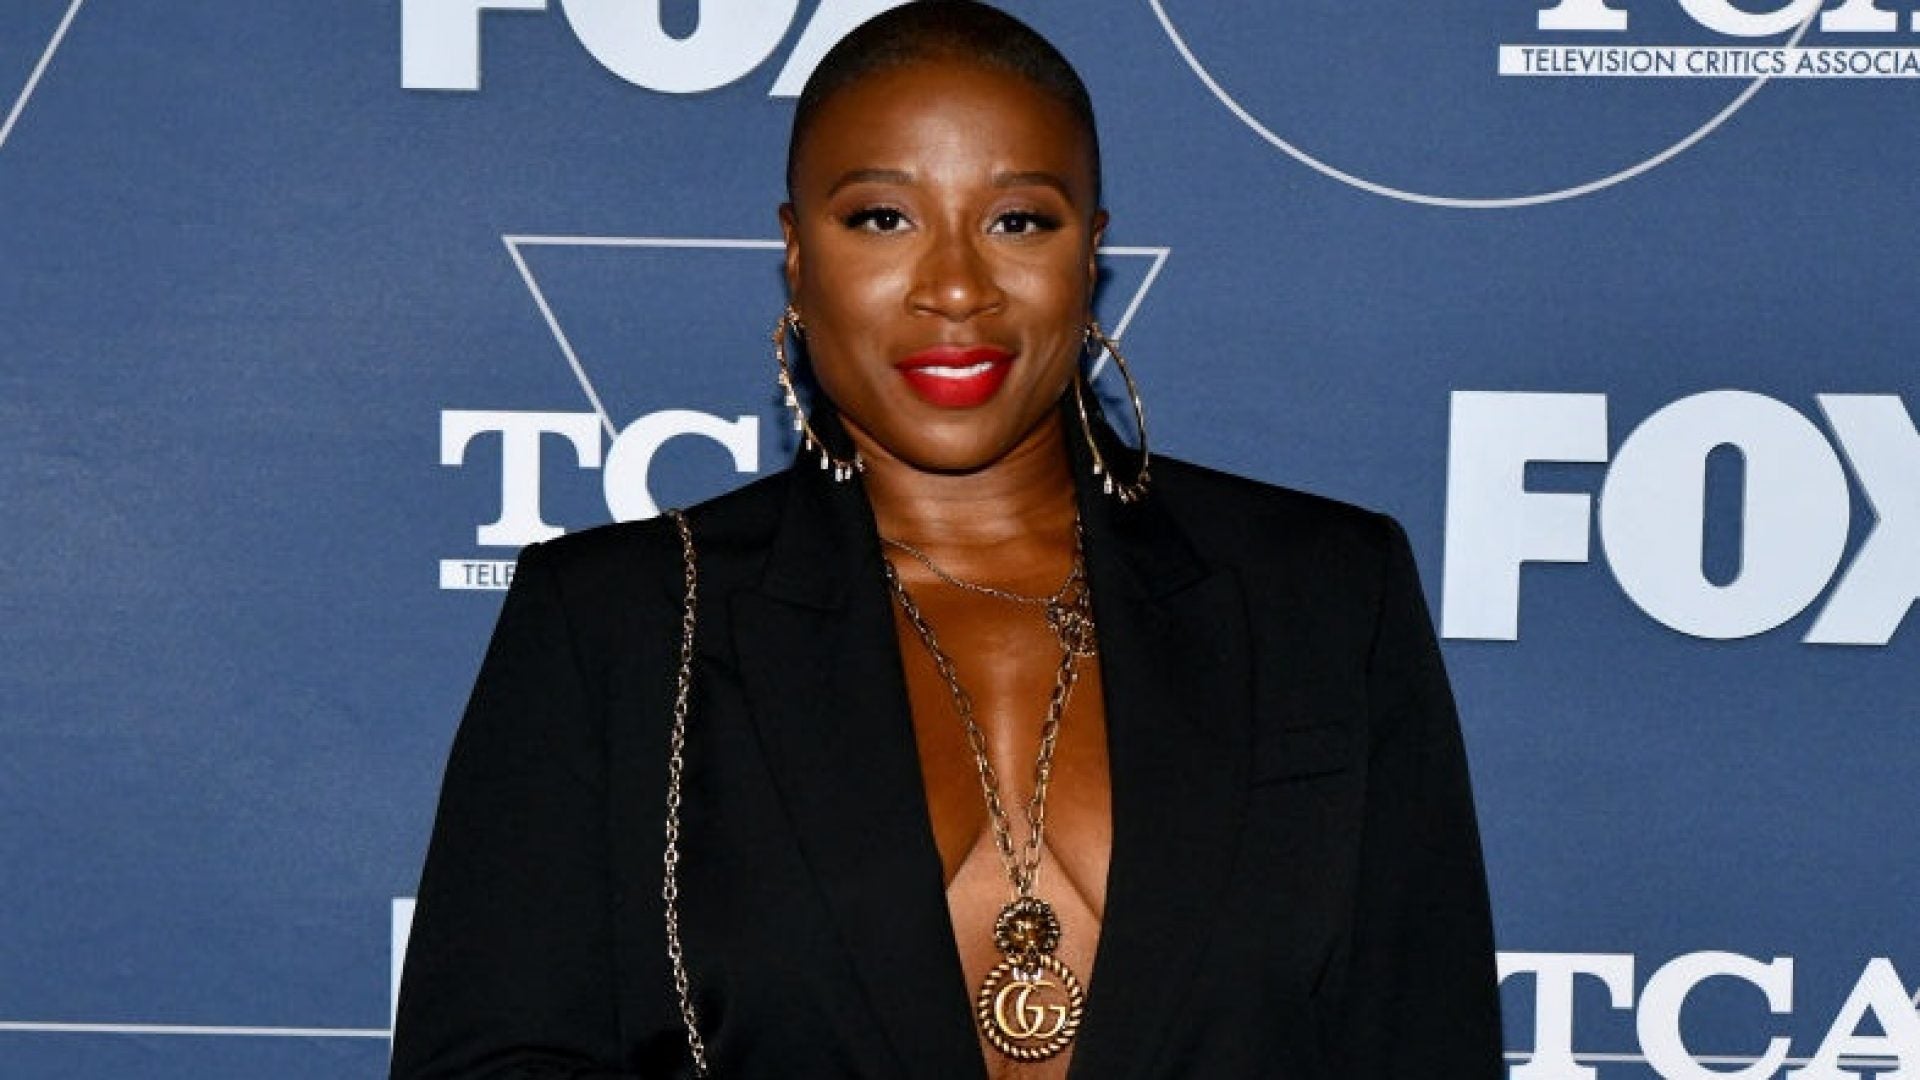 Aisha Hinds Spills The Tea On '9-1-1' And Getting Engaged During The Pandemic